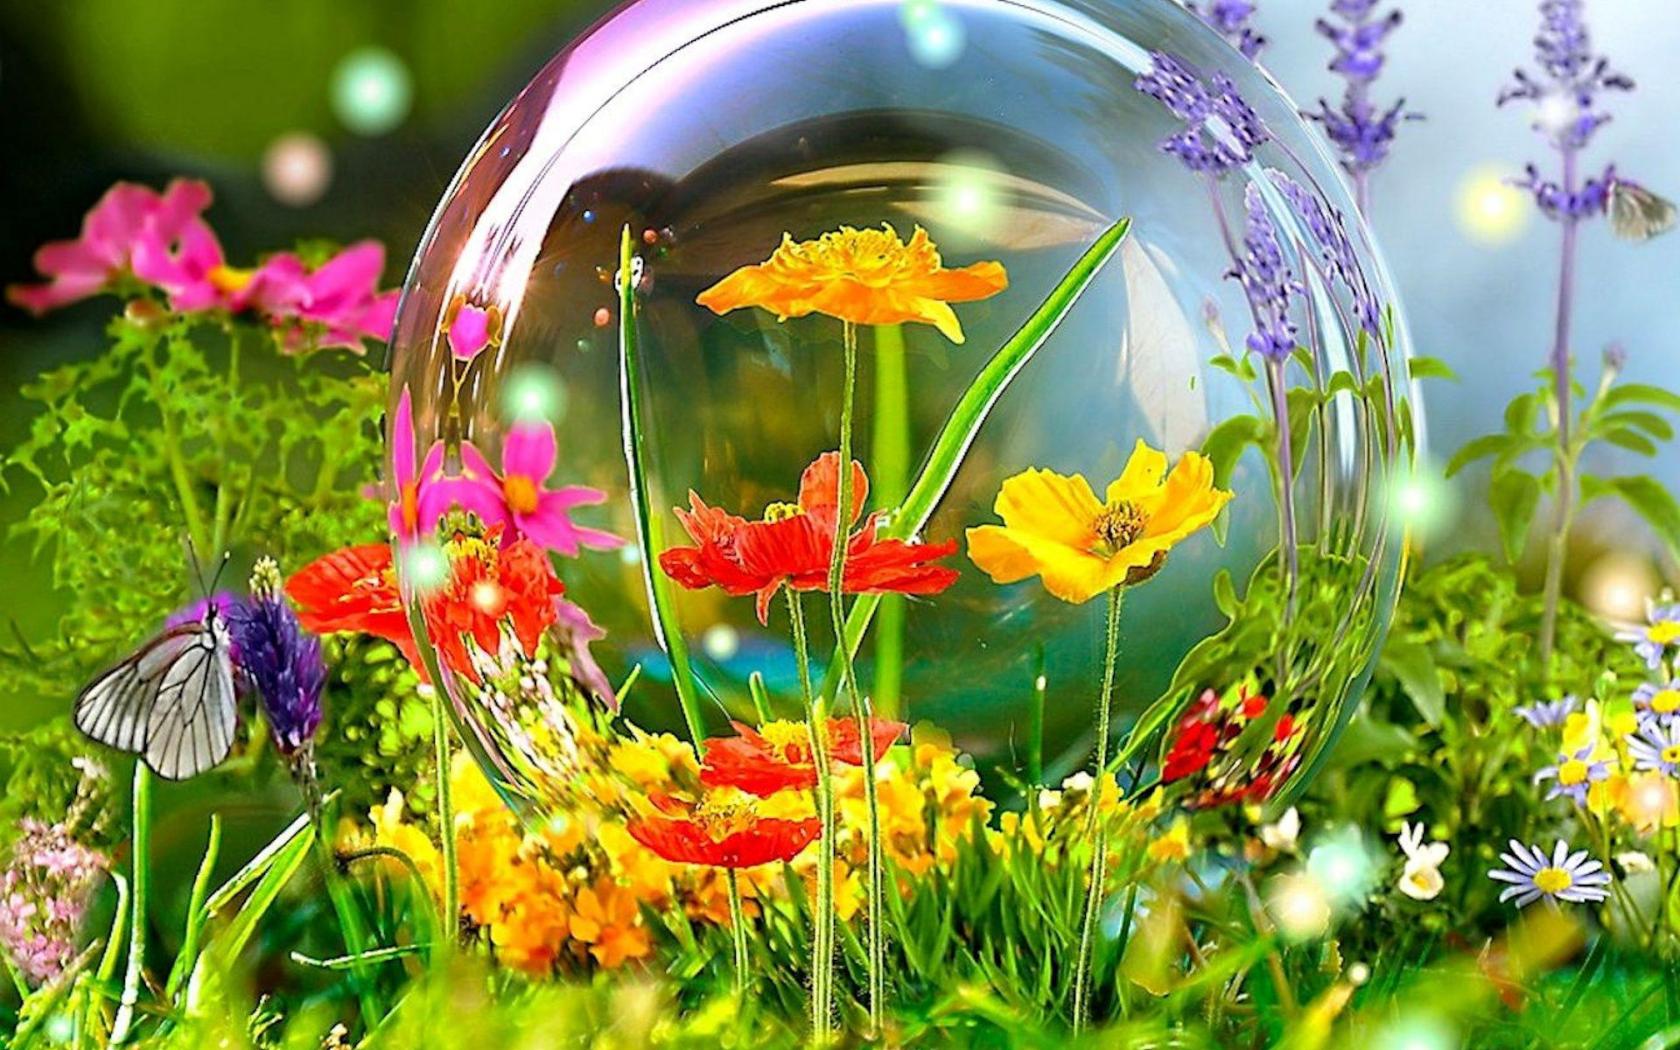 Spring Widescreen Wallpapers Group - Hd Wallpaper Widescreen Spring - HD Wallpaper 